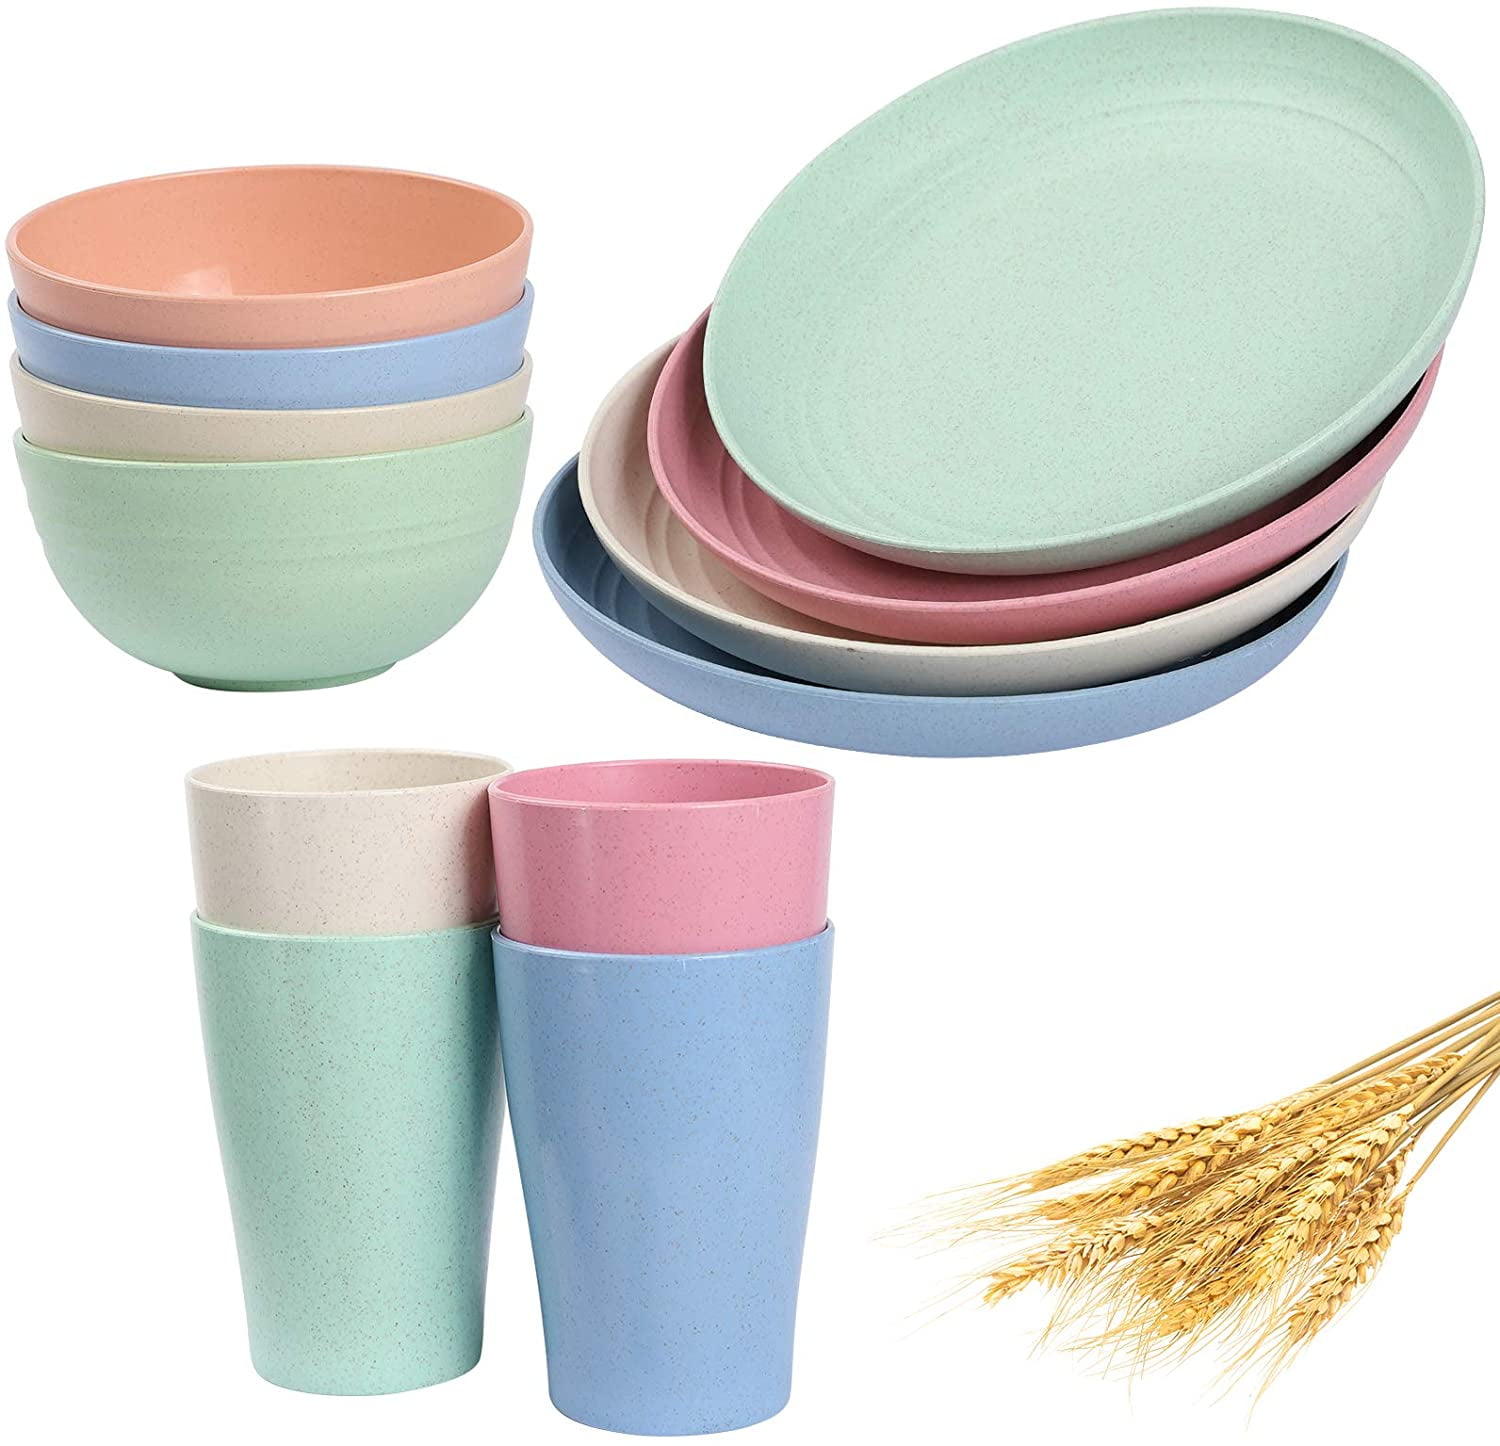 Eco Friendly & Reusable Plates QARYYQ Wheat Straw Dinnerware Sets Cups Bowls and Cutlery Set Lightweight Safe Great for Picnic and Party Unbreakable